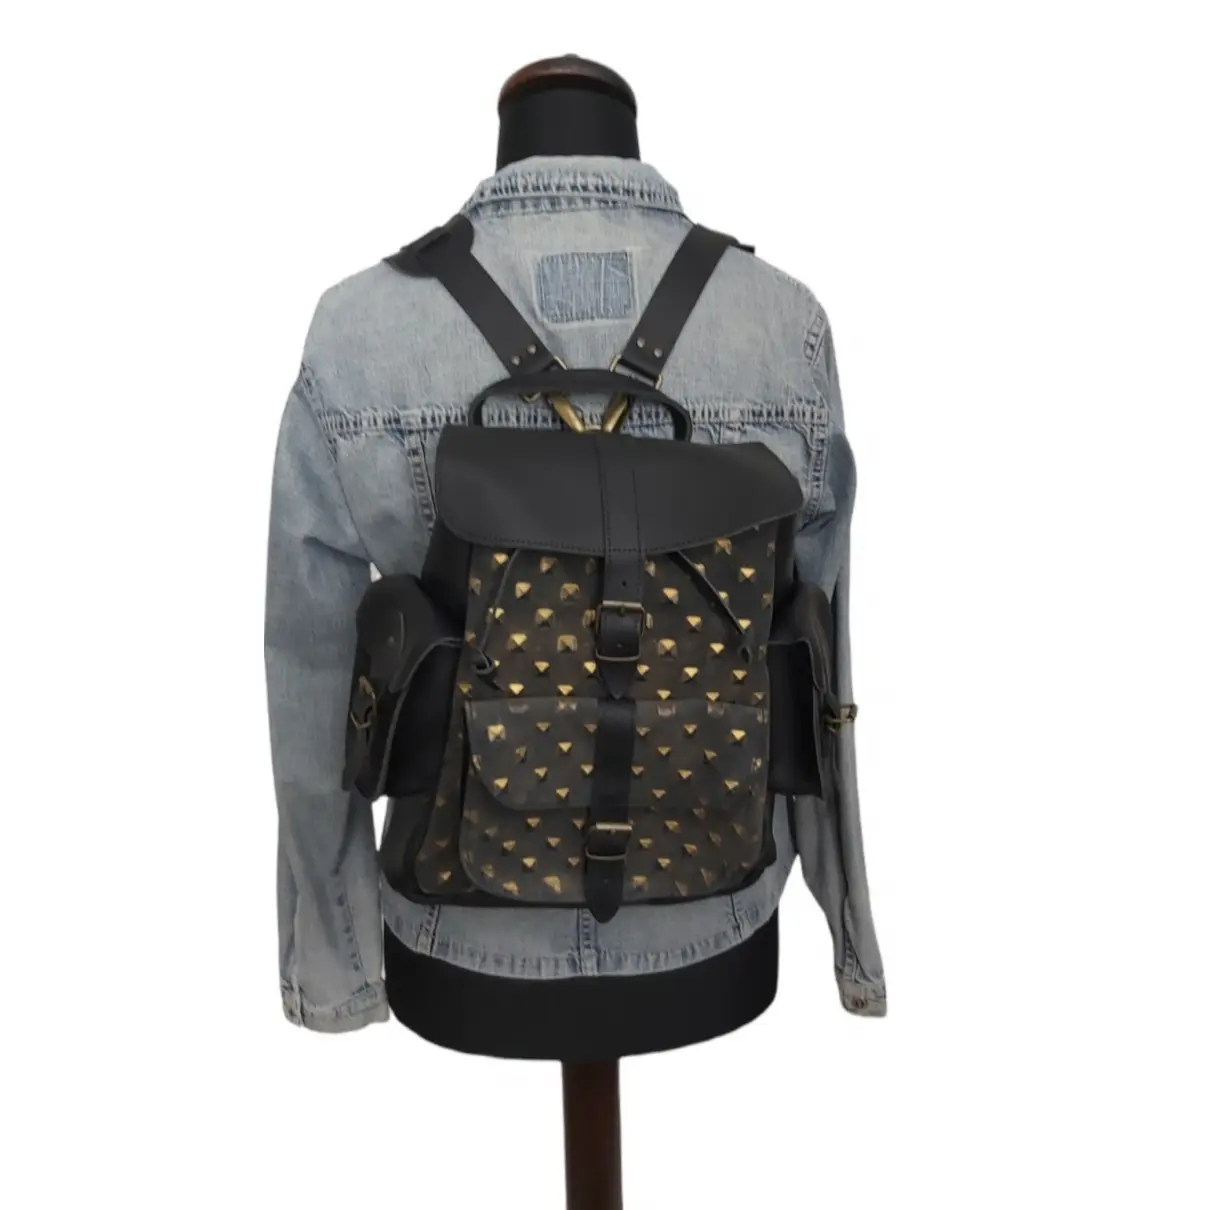 Leather backpack Grafea